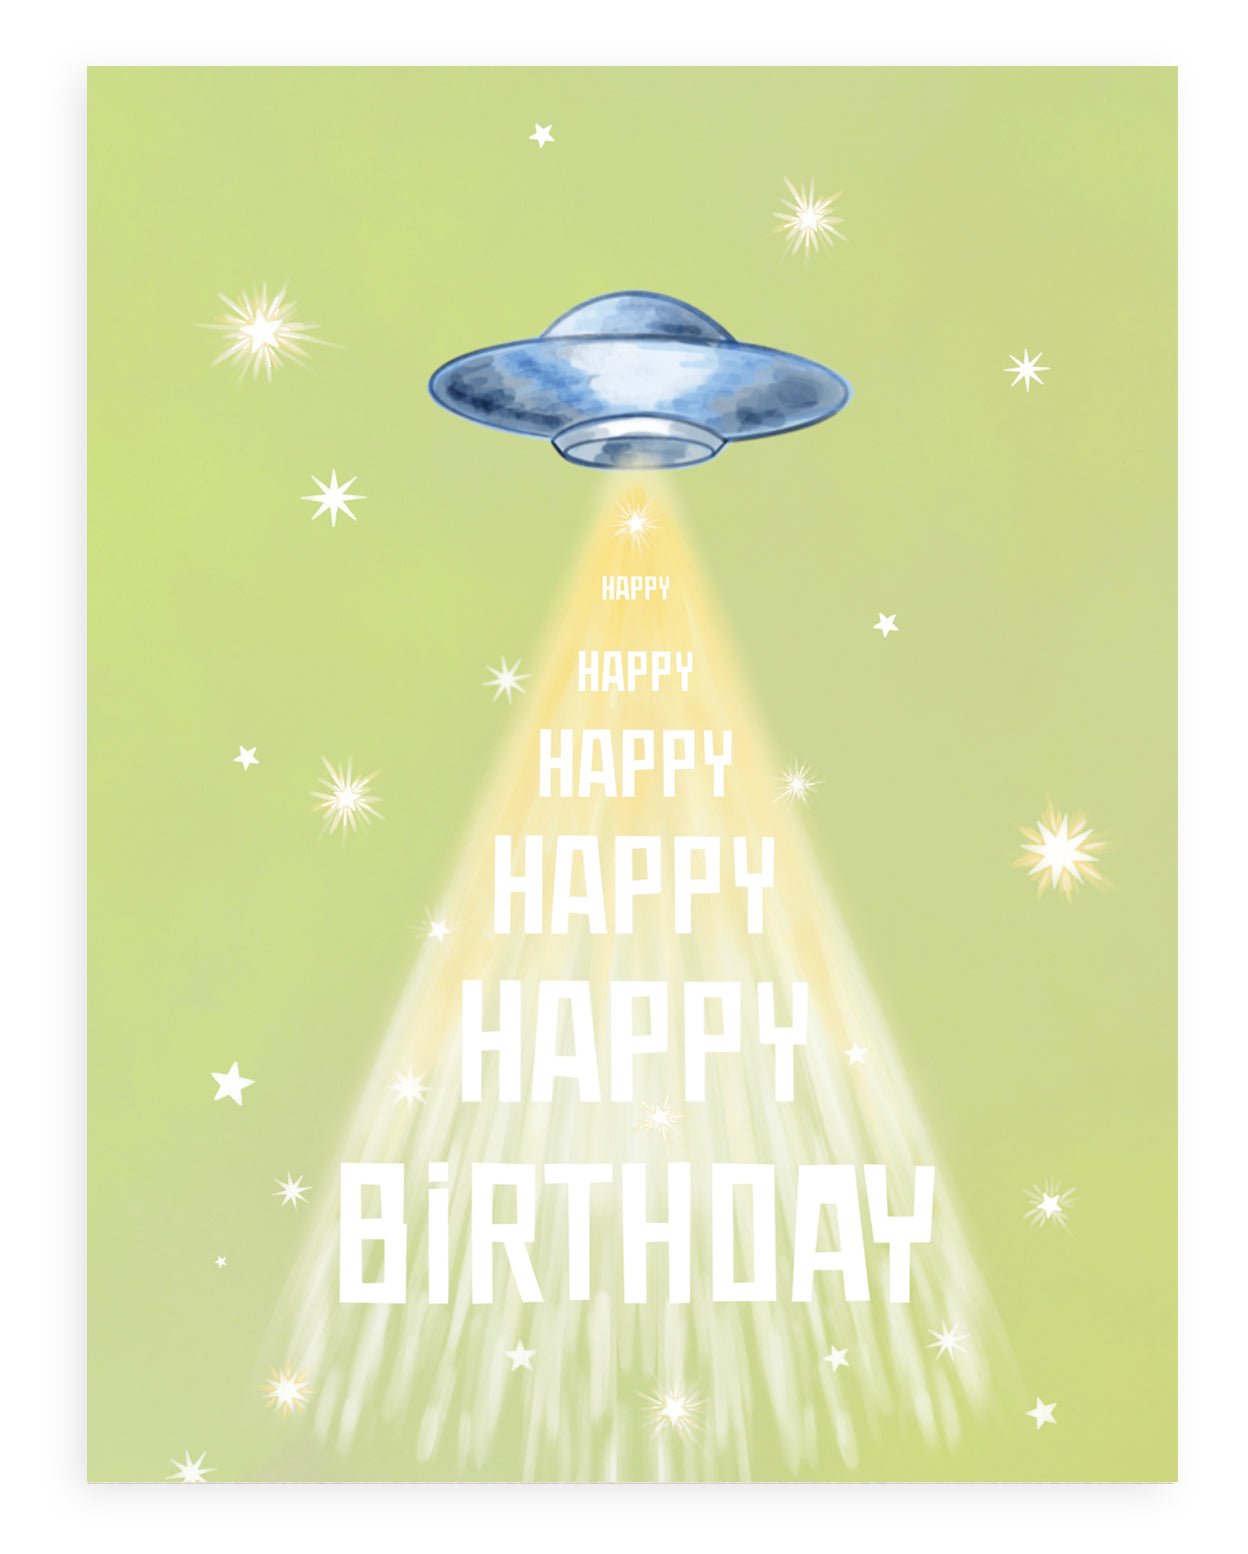 Greeting card with green background featuring stars and flying saucer with &quot;happy birthday&quot; printed down the front. Shown on white background.